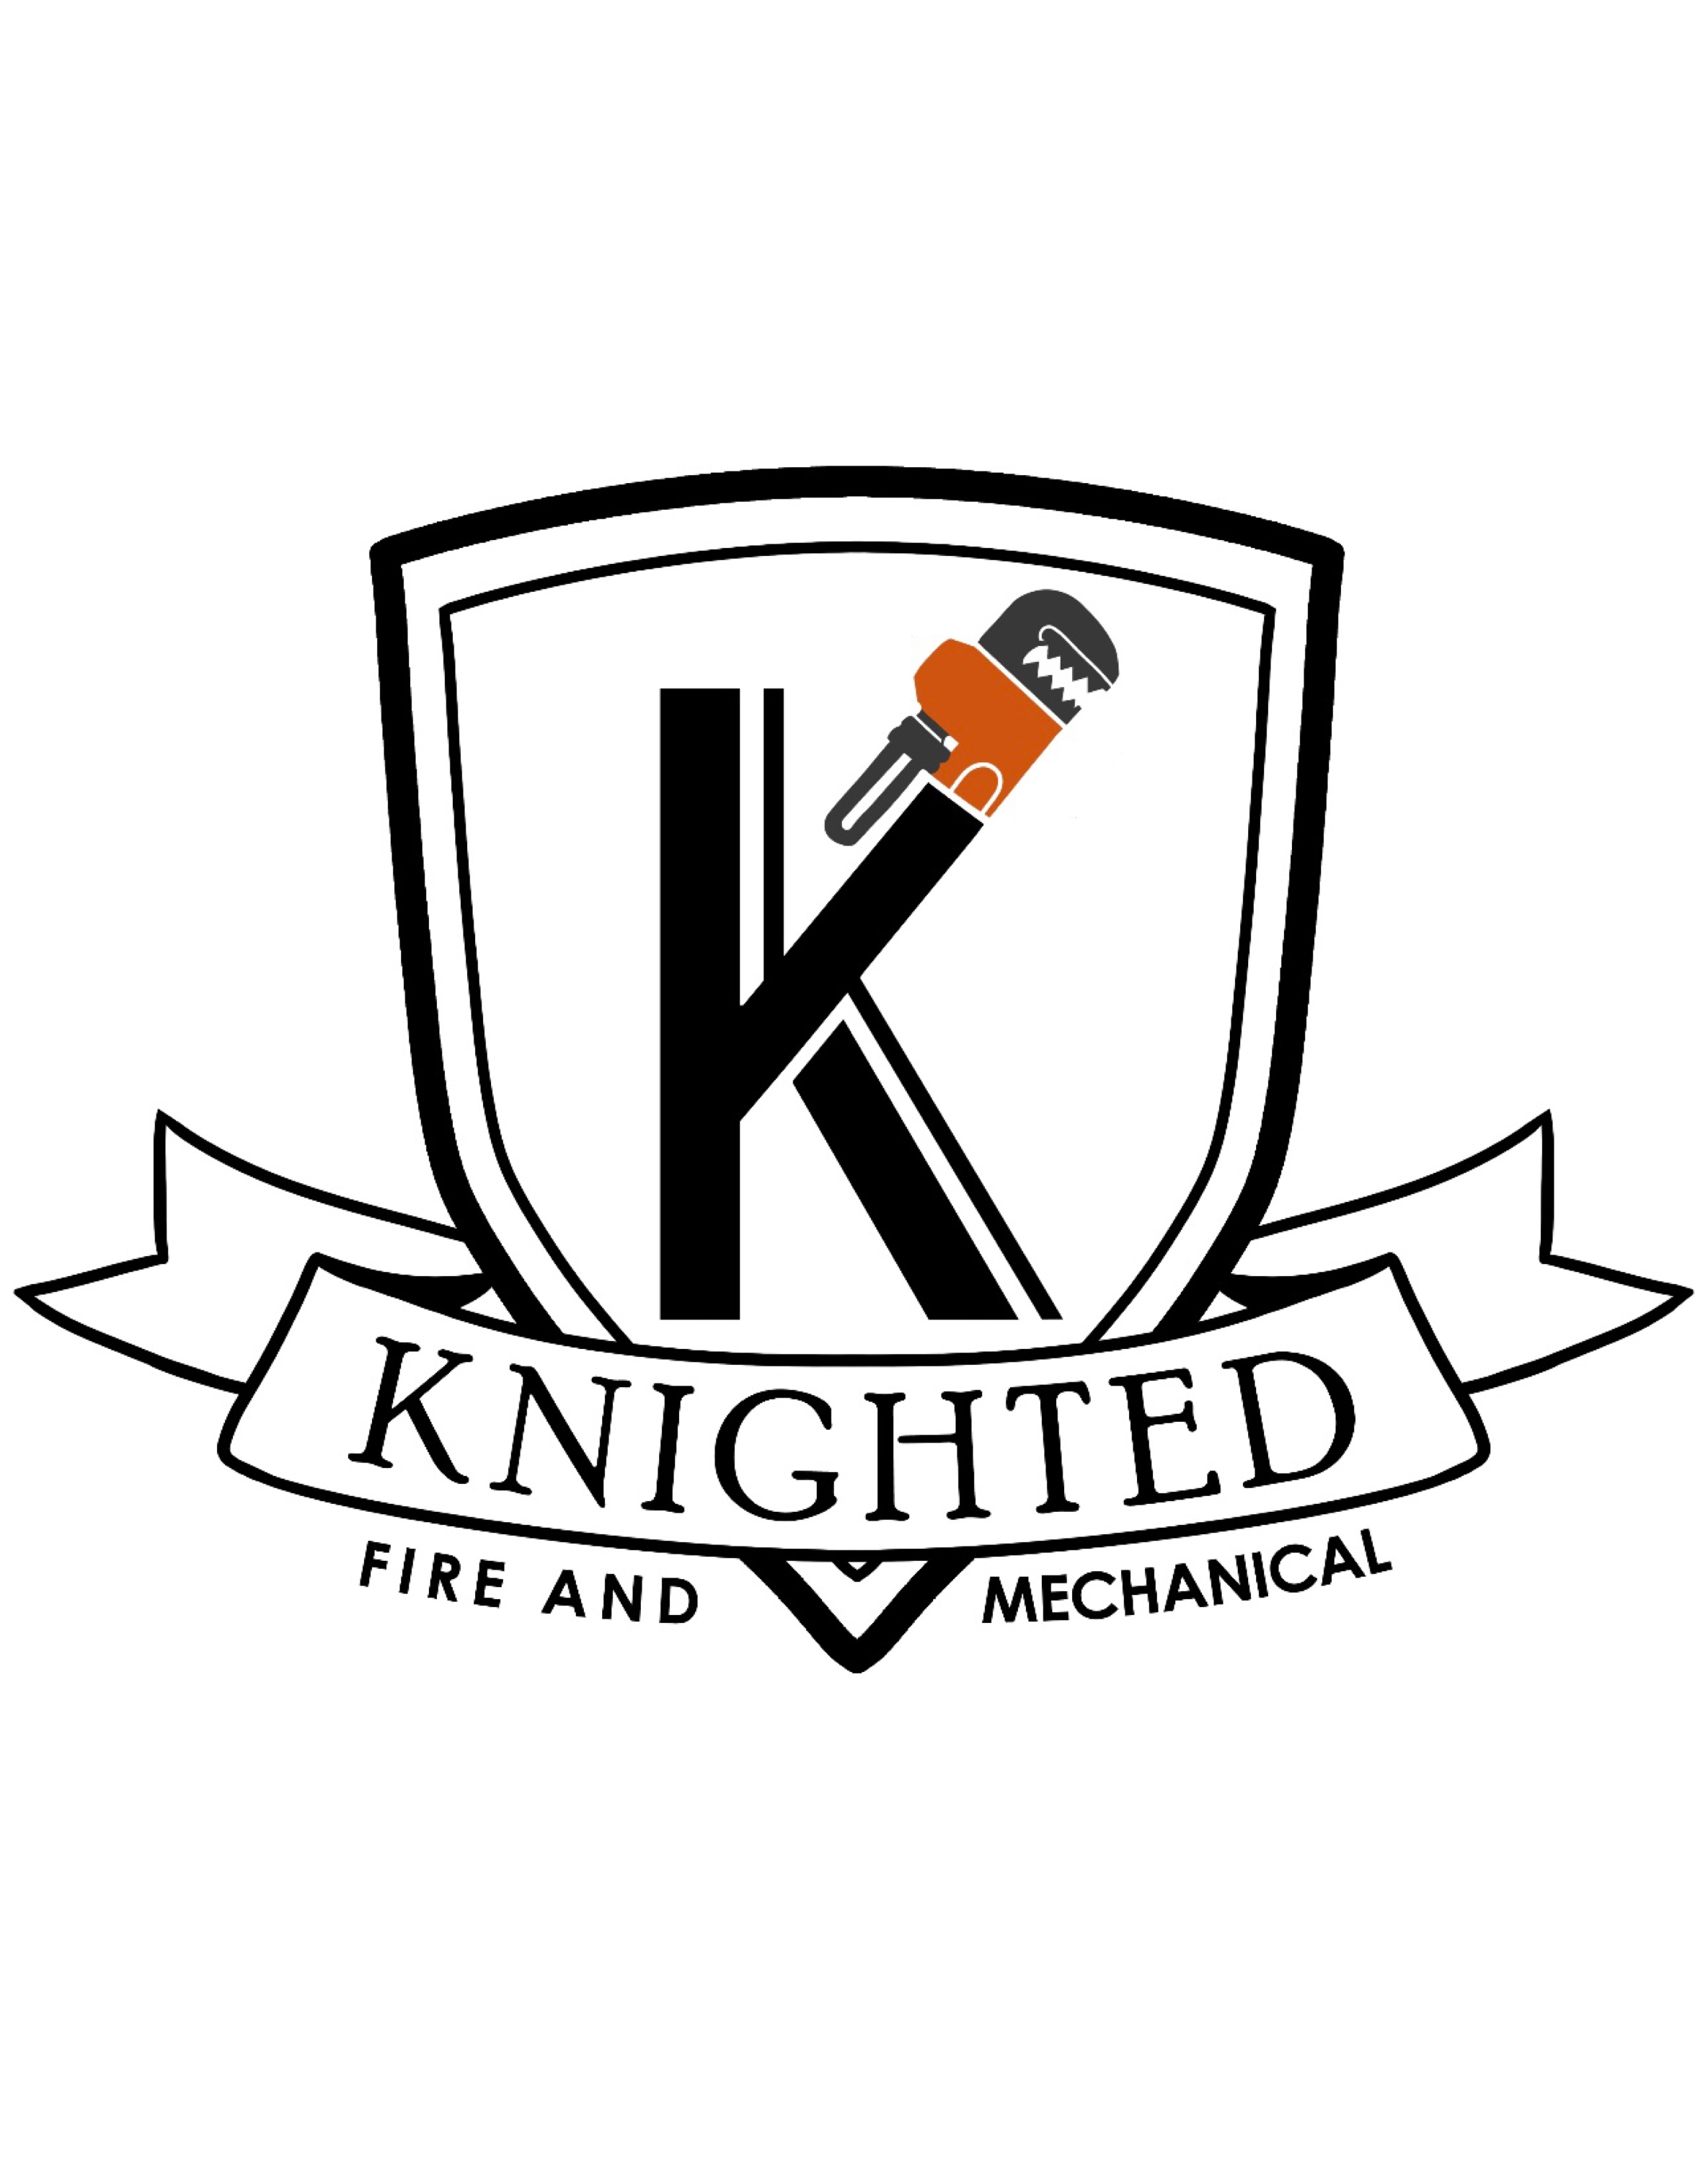 Knighted Fire and Mechanical Logo